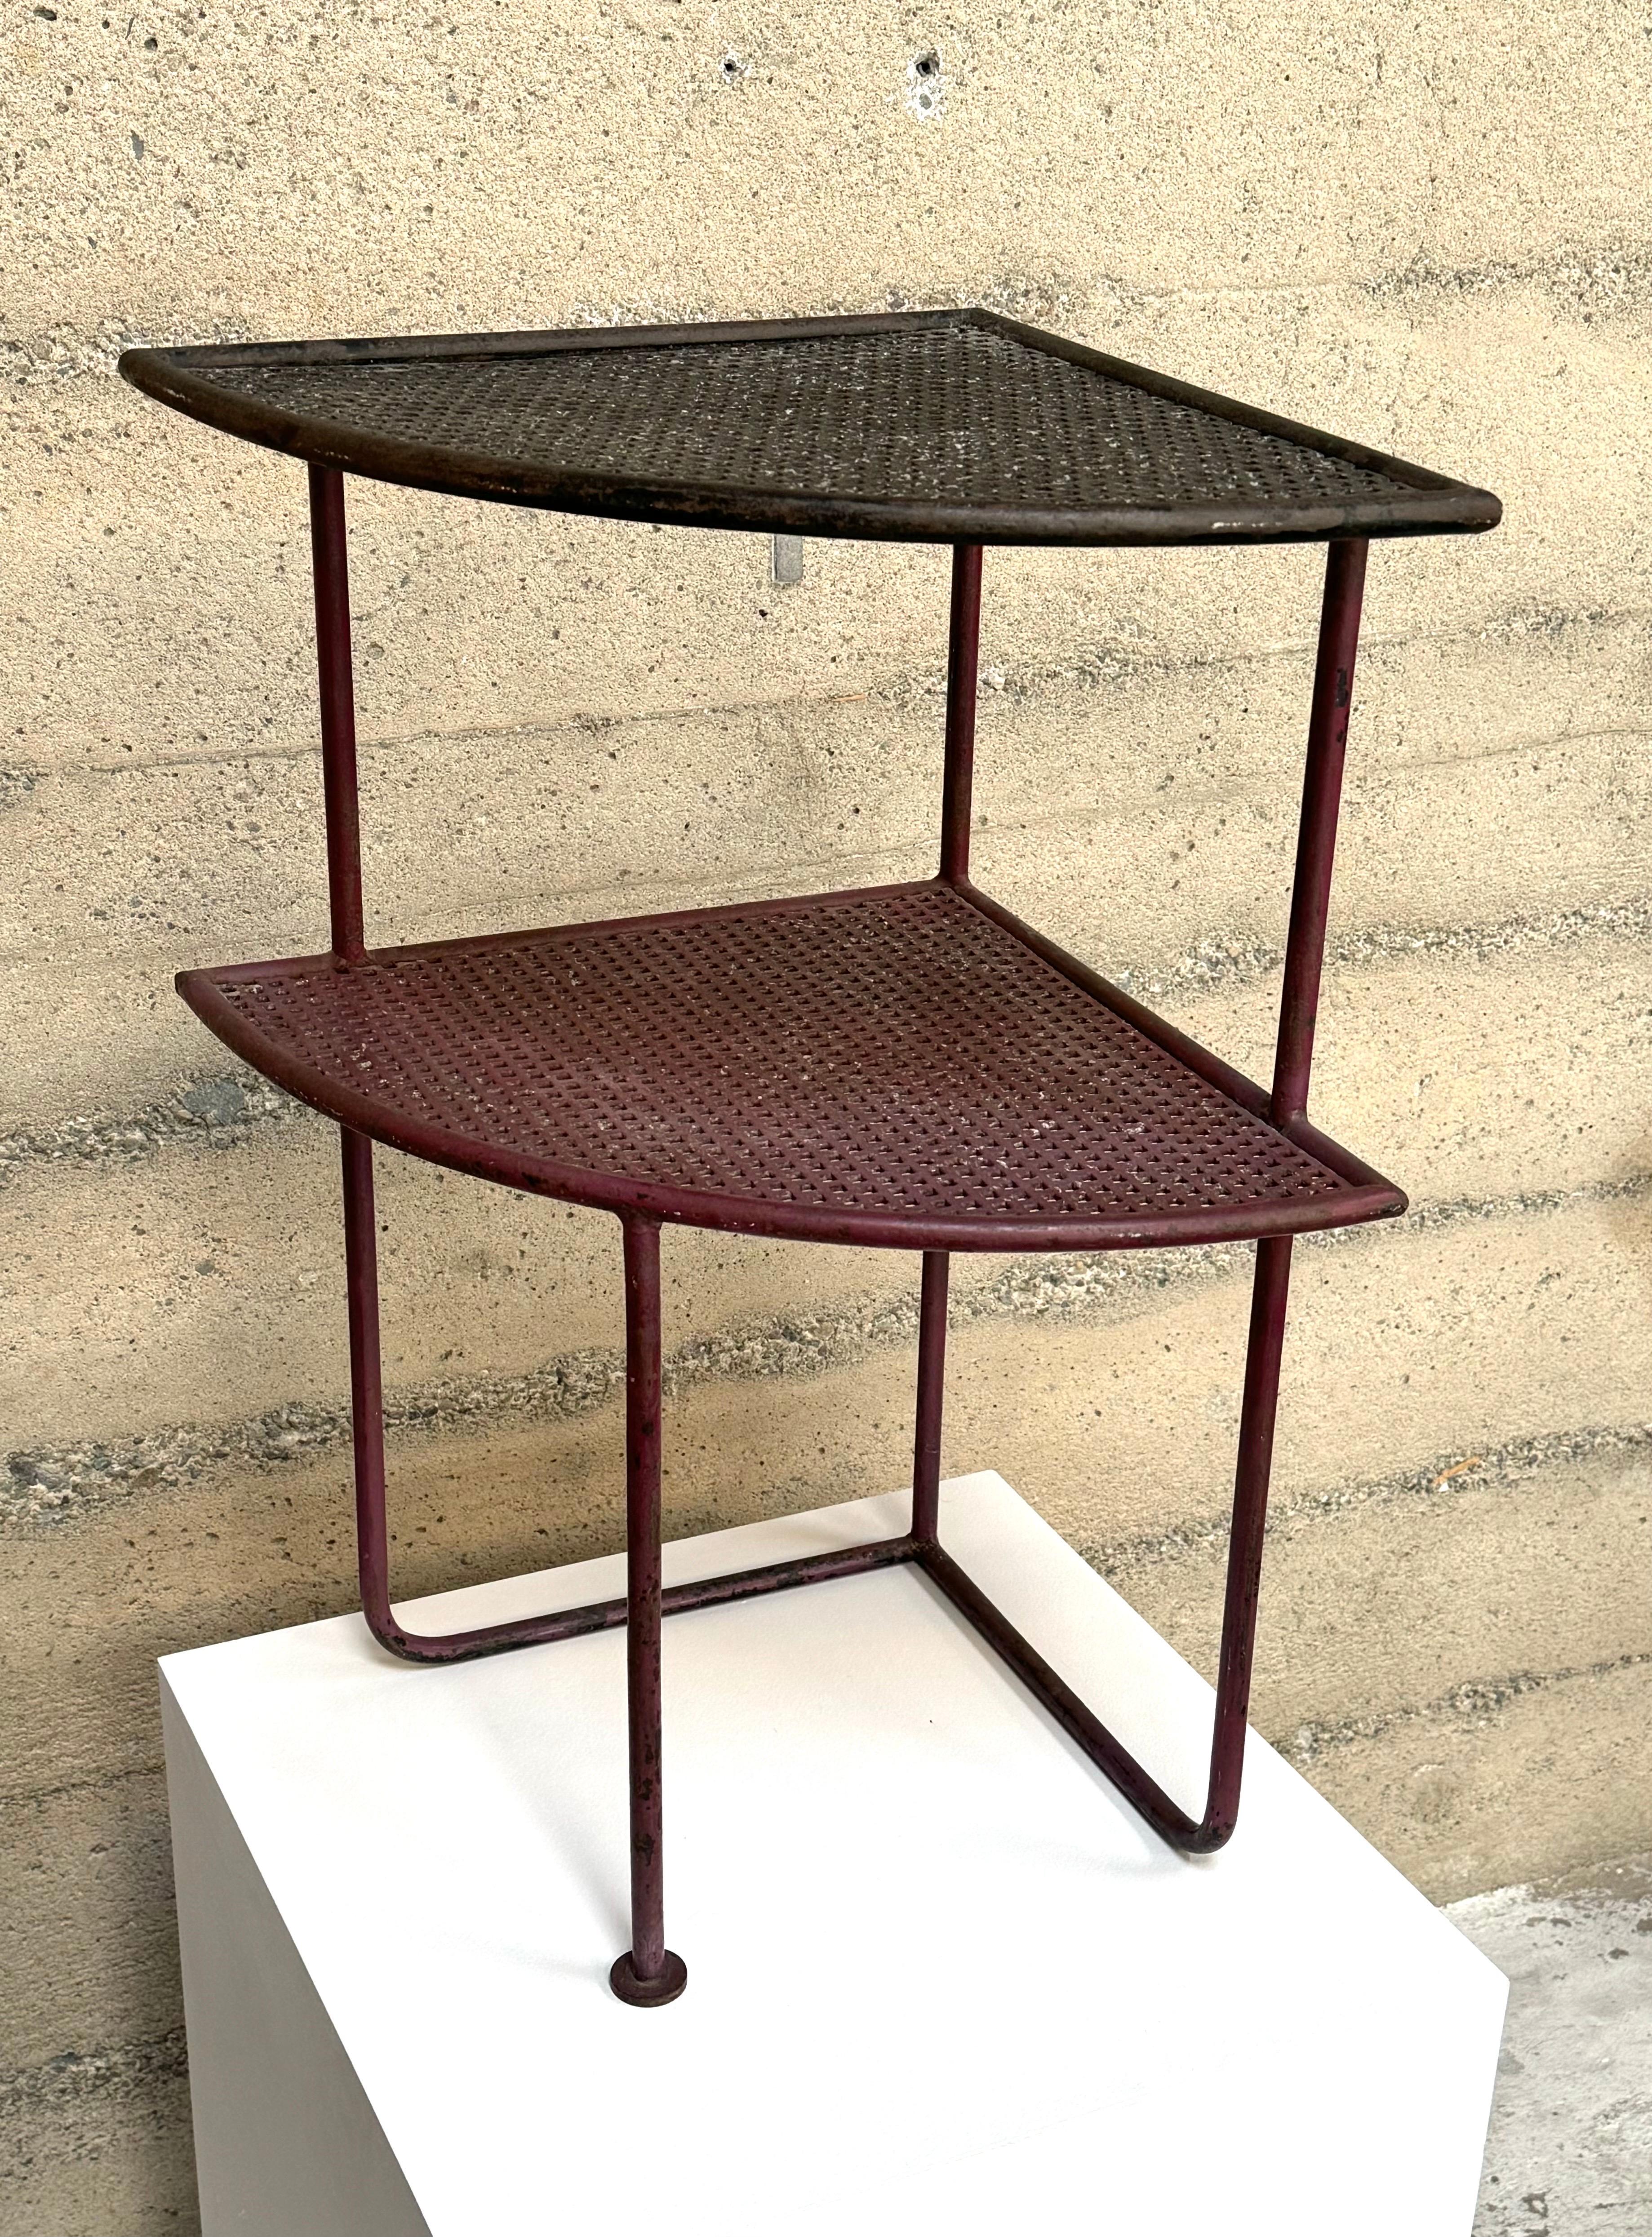 Mid-20th Century 1950s Modernist French Iron with Perforated Metal Shelves Side Table